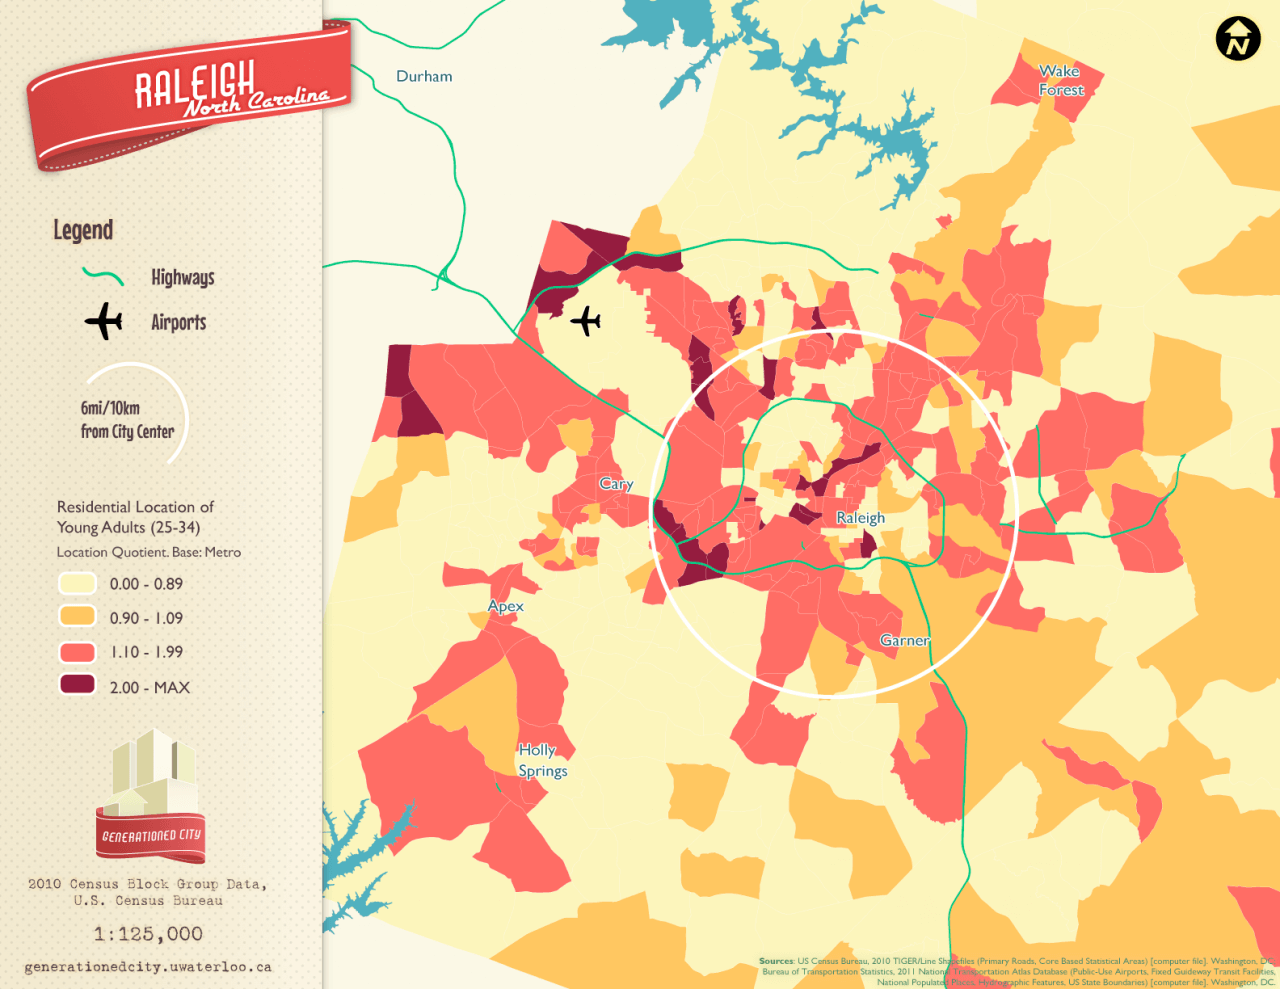 Residential location of young adults in Raleigh.